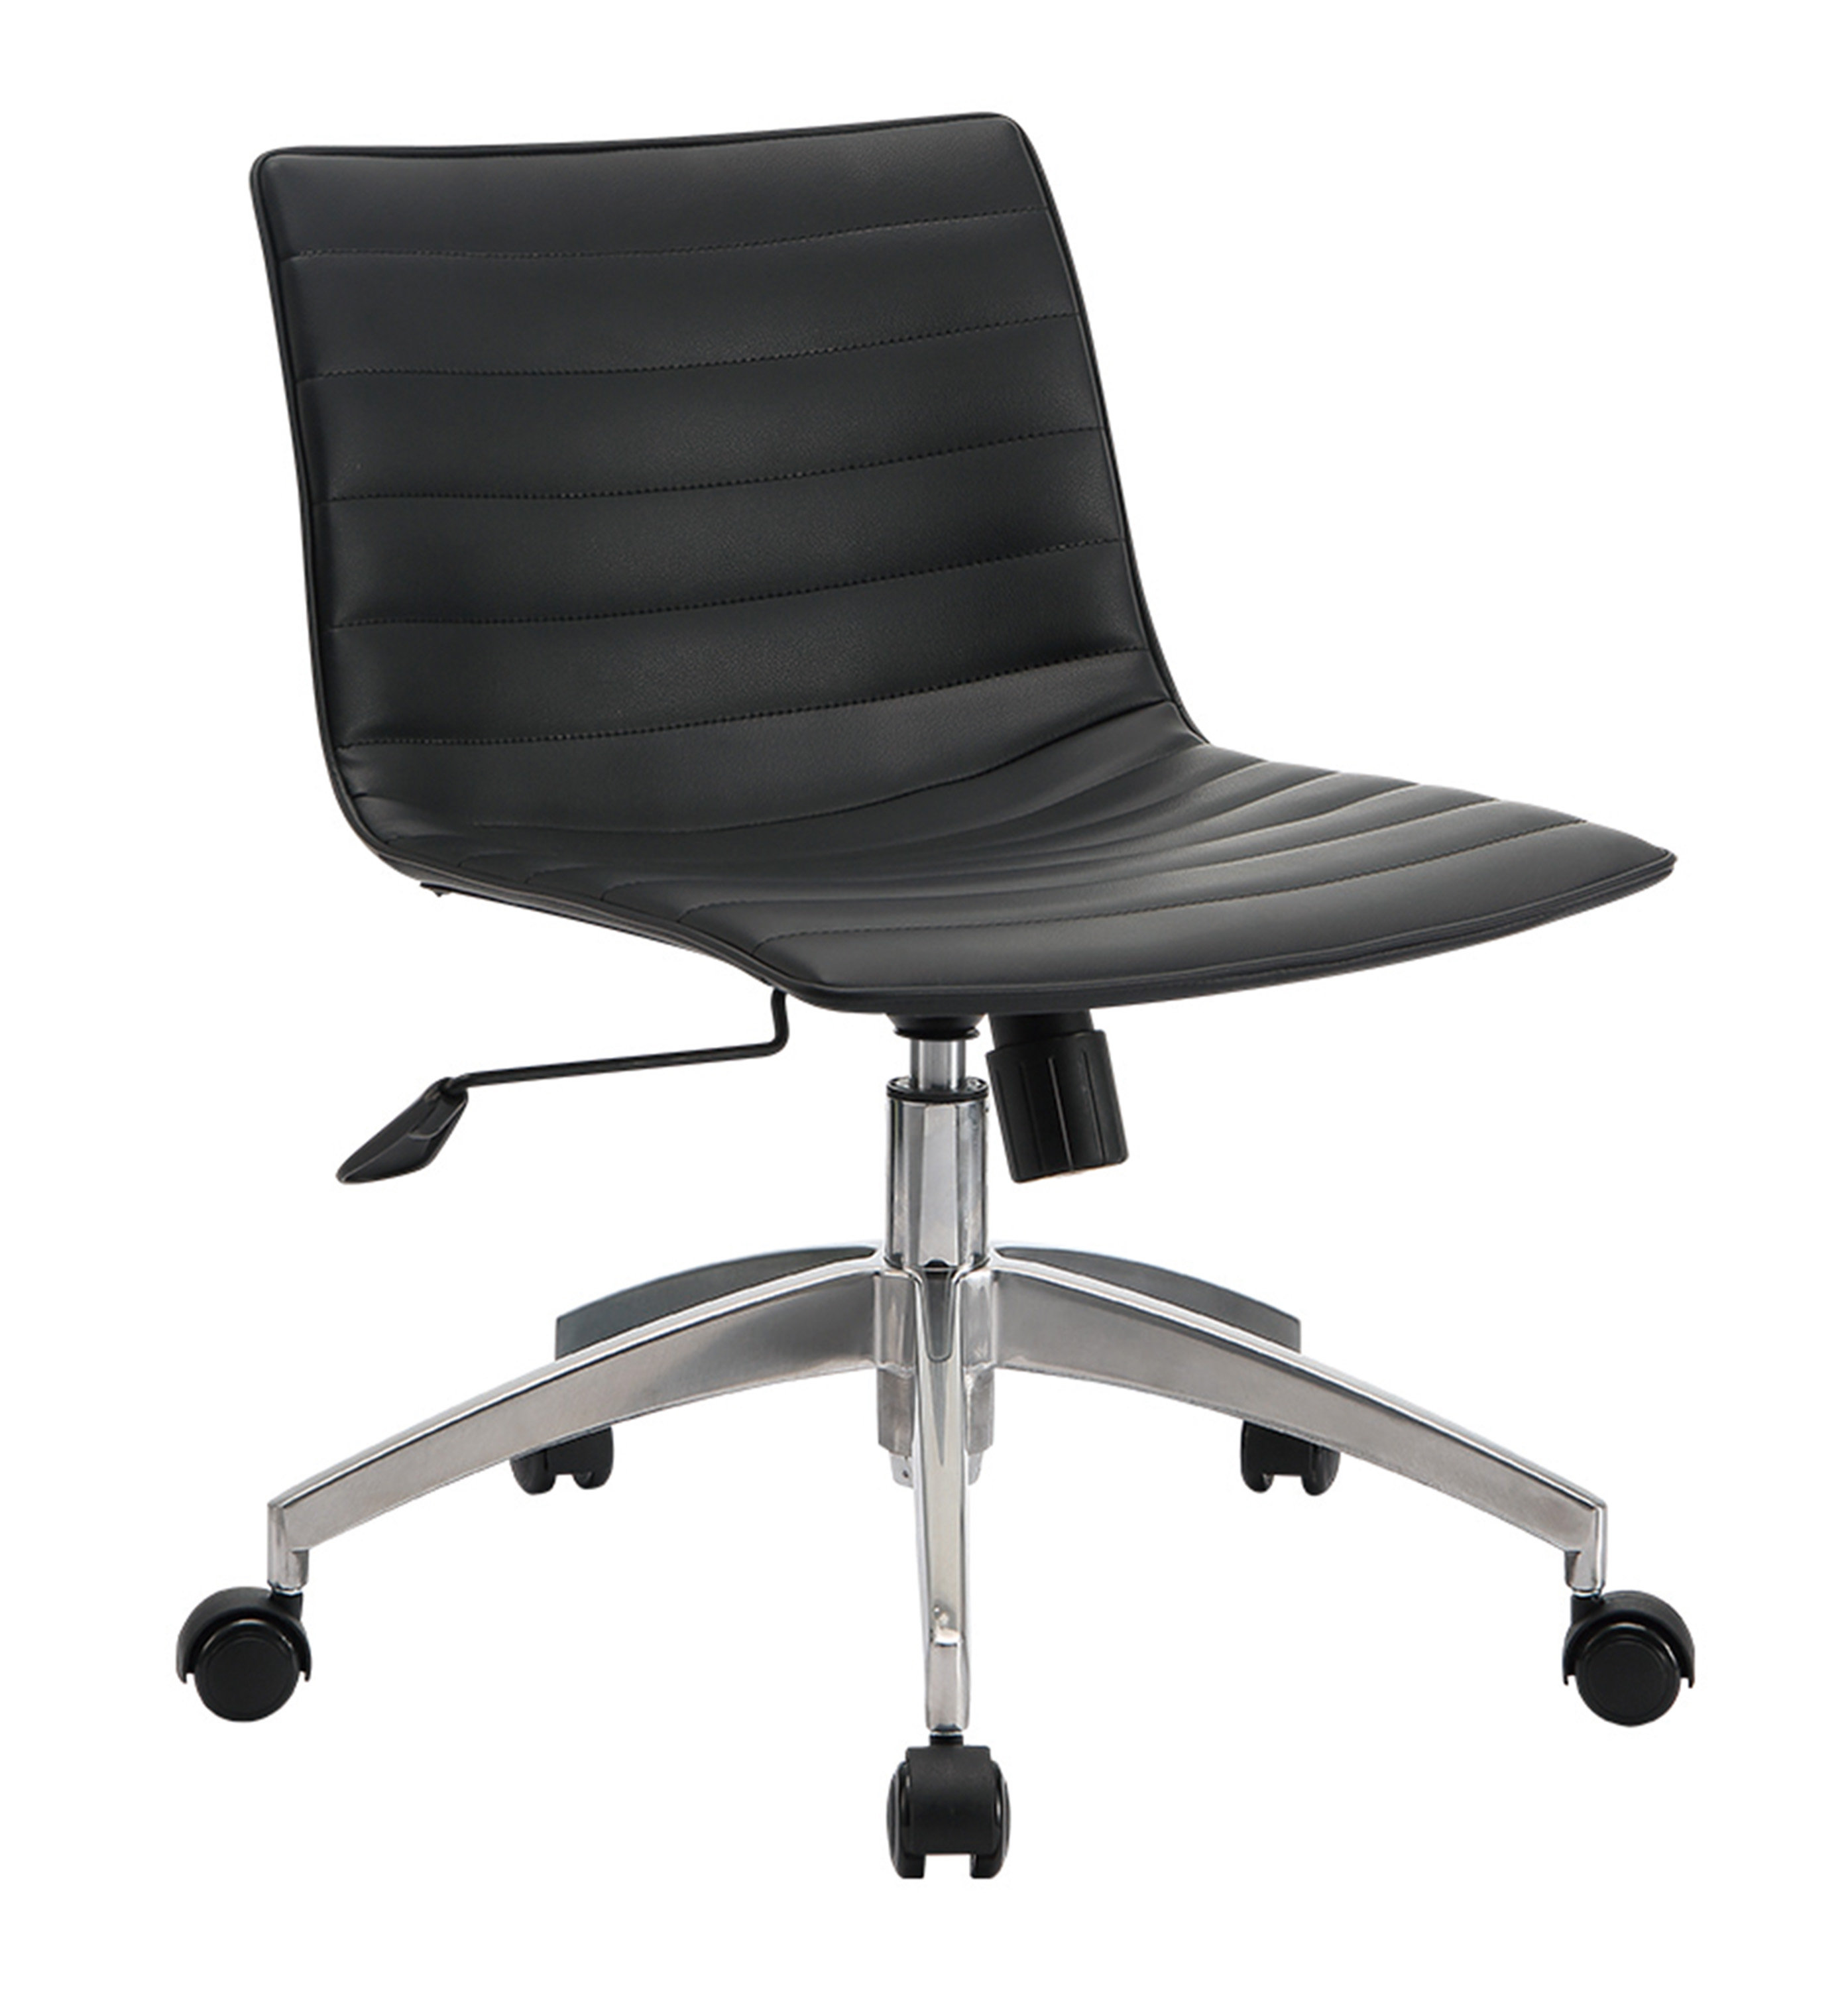 Newcity 6625B India Pure White Office Chair Luxury Mid Back Swivel Executive Office Chair New Design of Conference Meeting Office Chair Supplier Foshan China